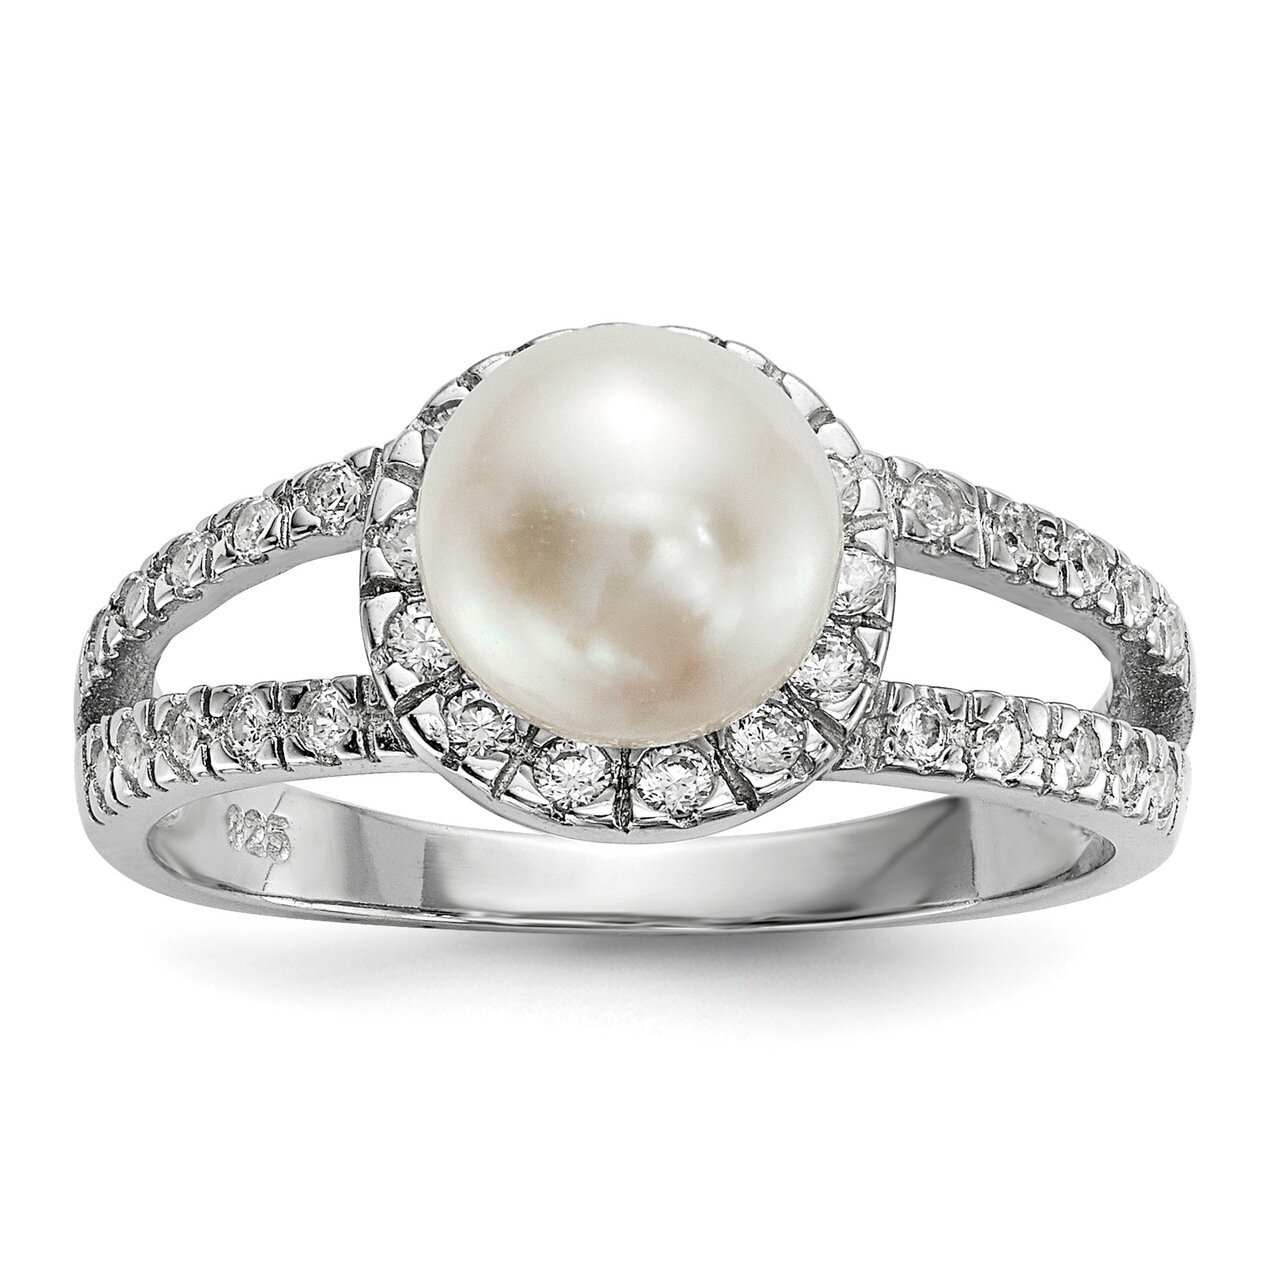 7-8mm White Button Cultured Freshwater Pearl CZ Diamond Ring Sterling Silver Rhodium-plated QR6543